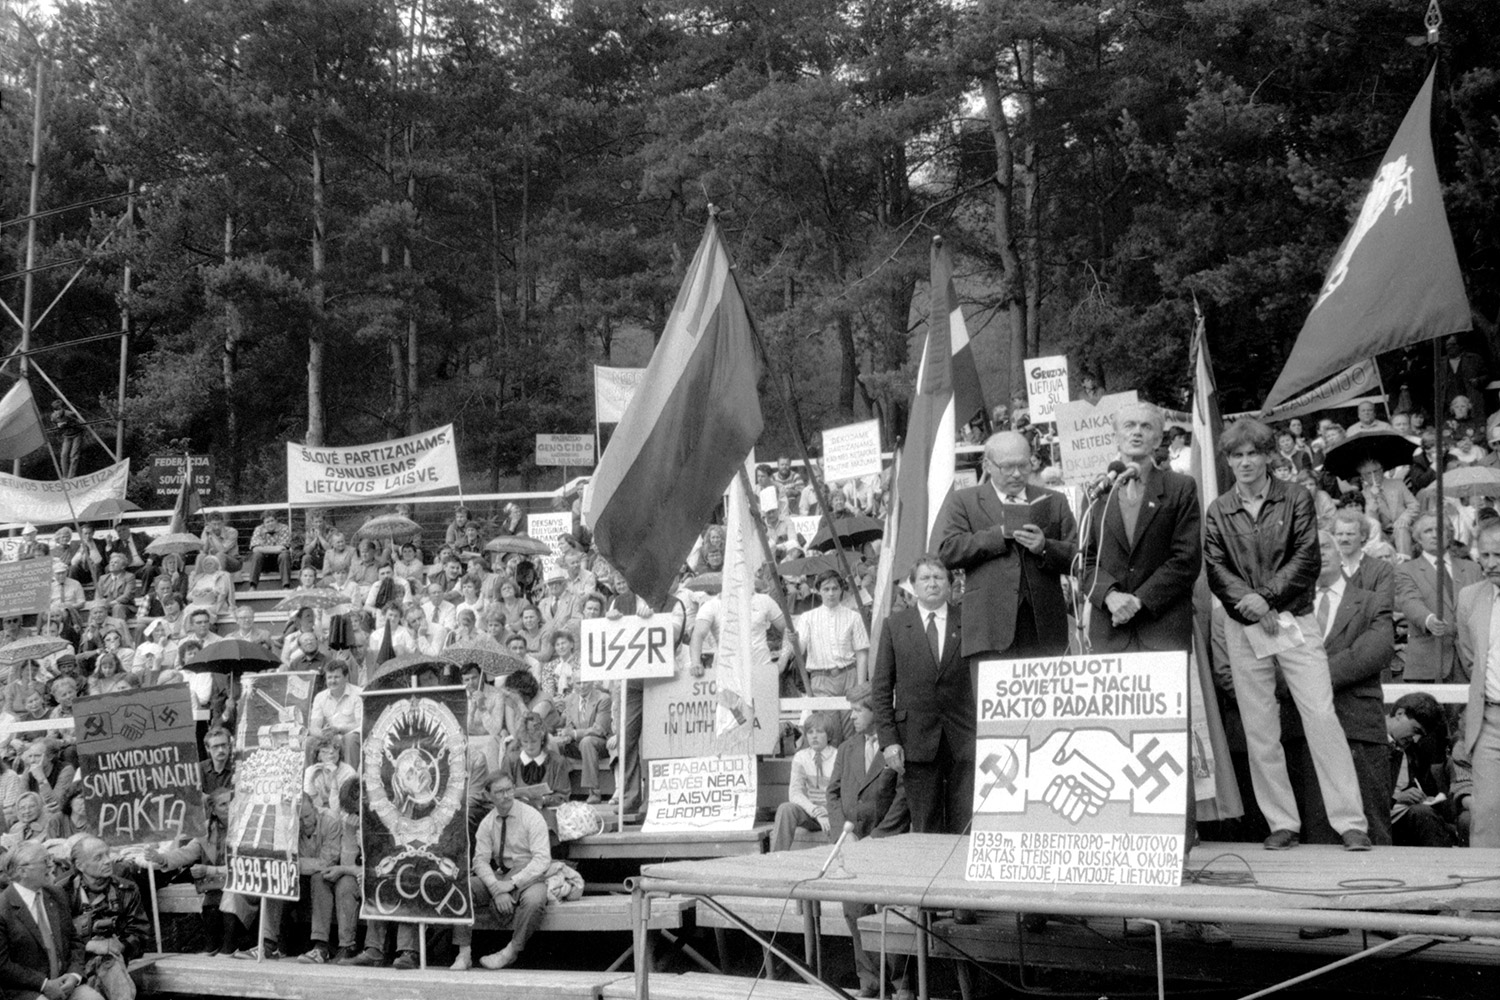 23/08/1989 – Meeting of the Union of Freedom Defenders in Vilnius Kalnų Park to condemn the 50th anniversary of the Molotov-Ribbentrop Pact and its consequences. At the microphone: dissident Povilas Pečeliūnas. LVCA, photographer: V. Kapočius.